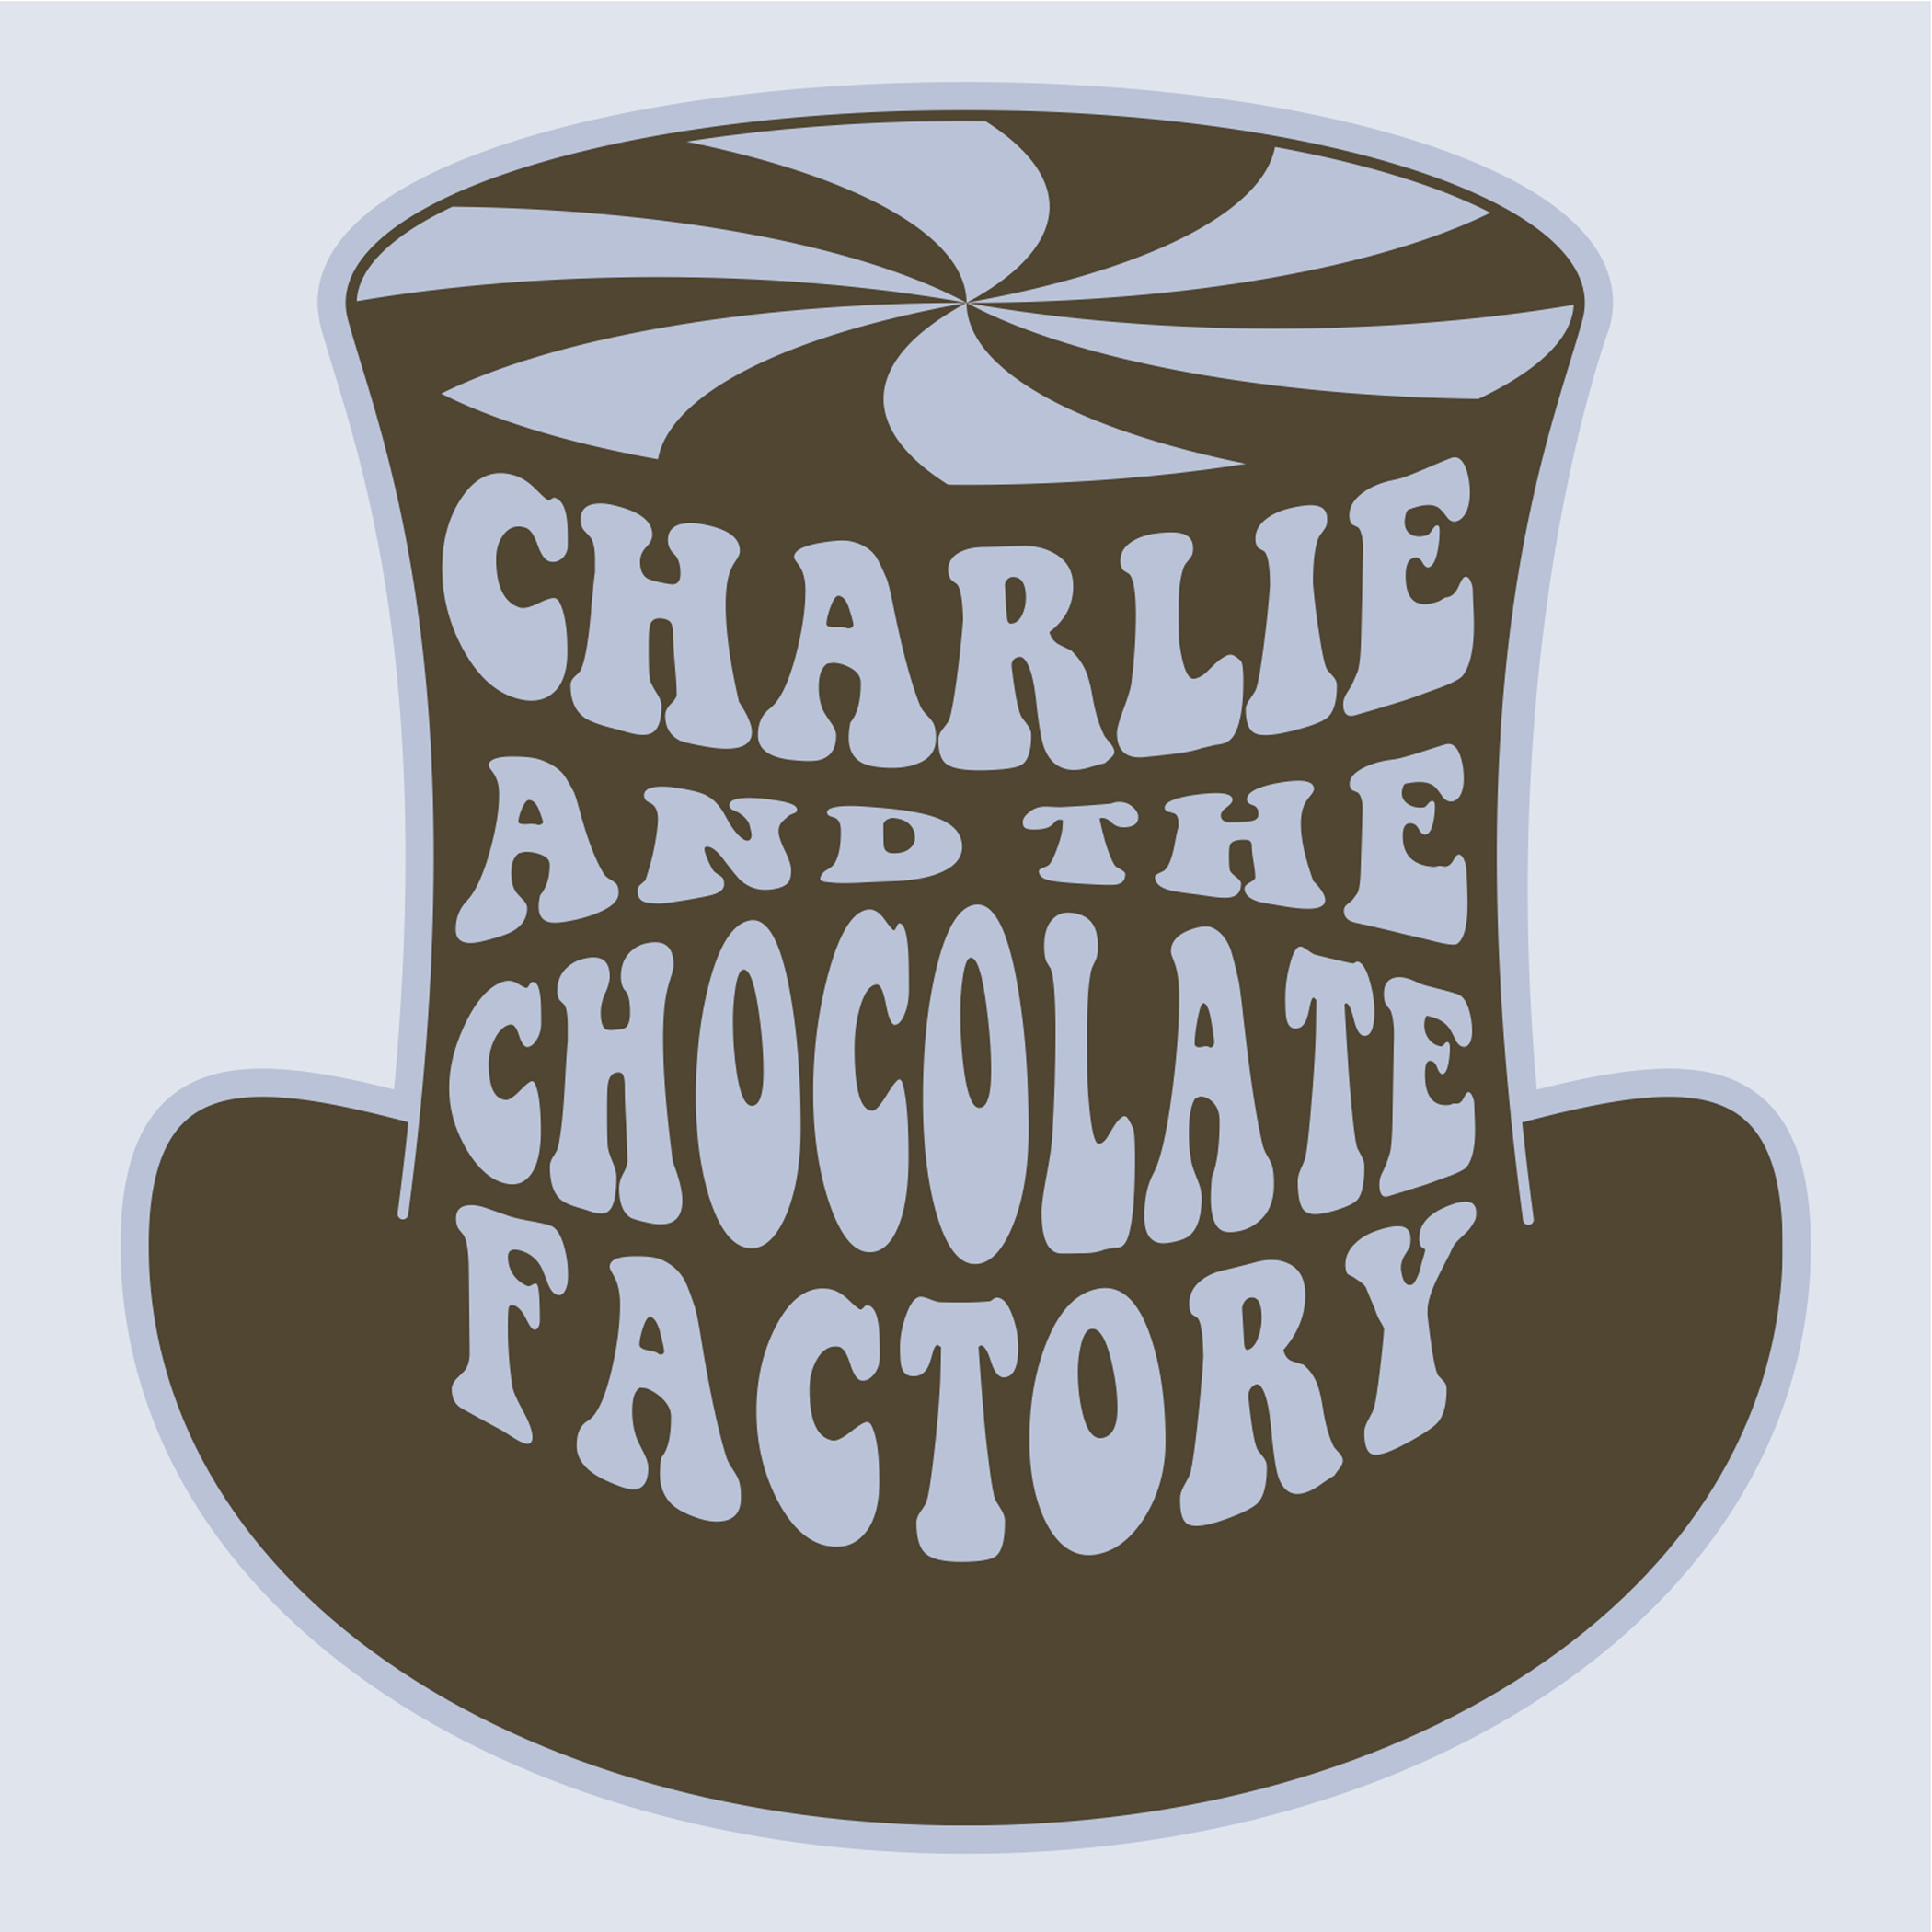  Branding creative, copywriting and design by Chuck Mitchell  Pro bono work developed for Holy Names Jubilee School’s production of Charlie and the Chocolate Factory  © Chuck Mitchell. All rights reserved. 